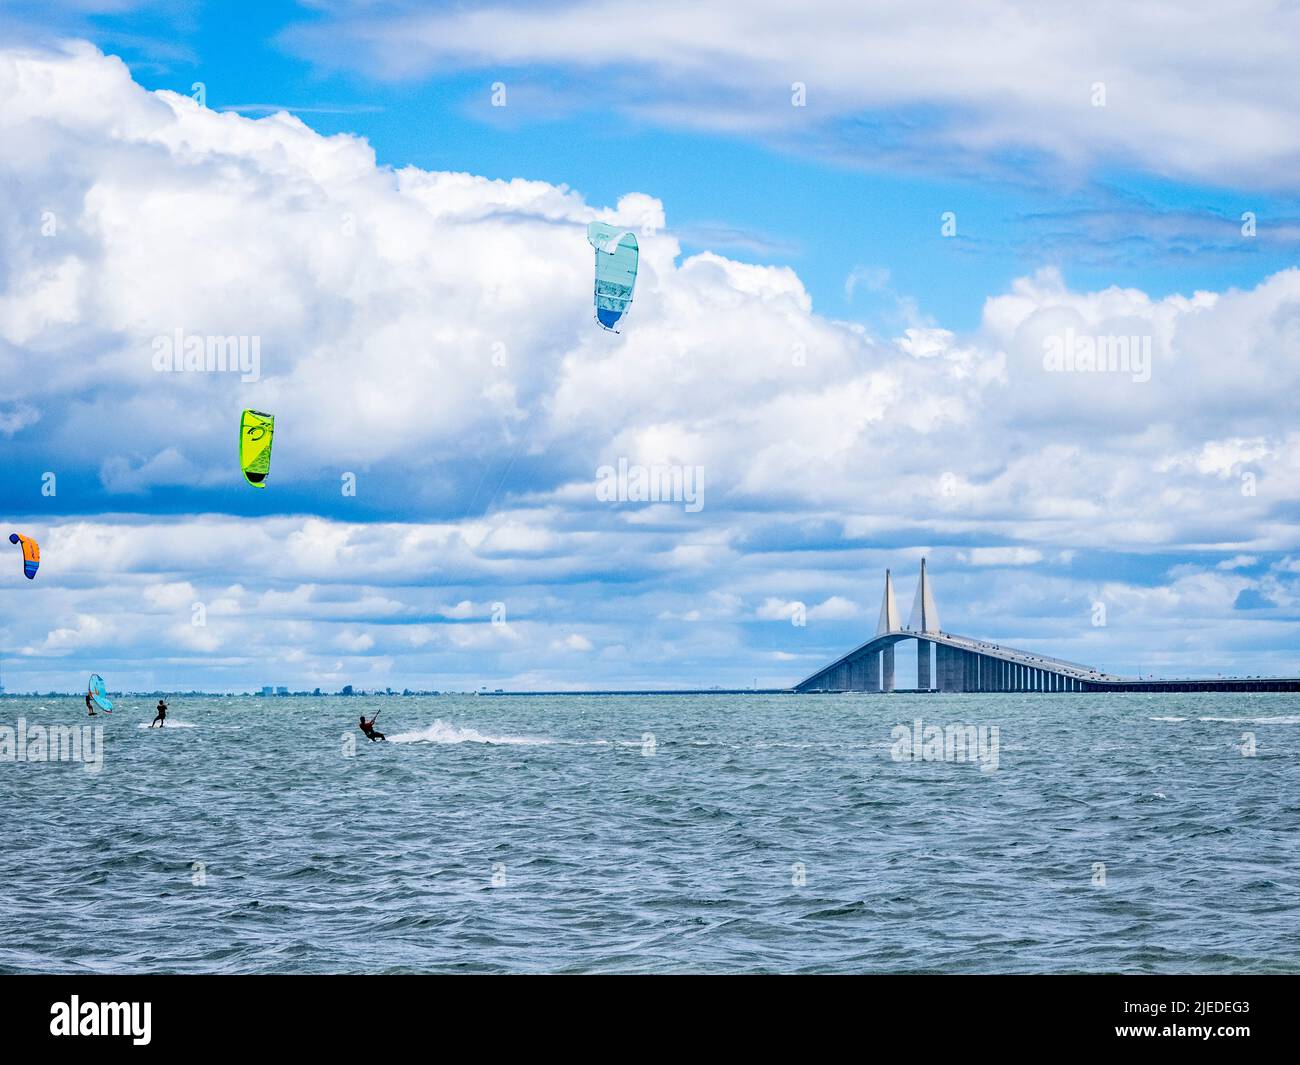 Kiteboarders or Kitesurfers in Tampa Bay with The Sunshine Skyway Bridge in the background in St Petersburg Florida USA Stock Photo